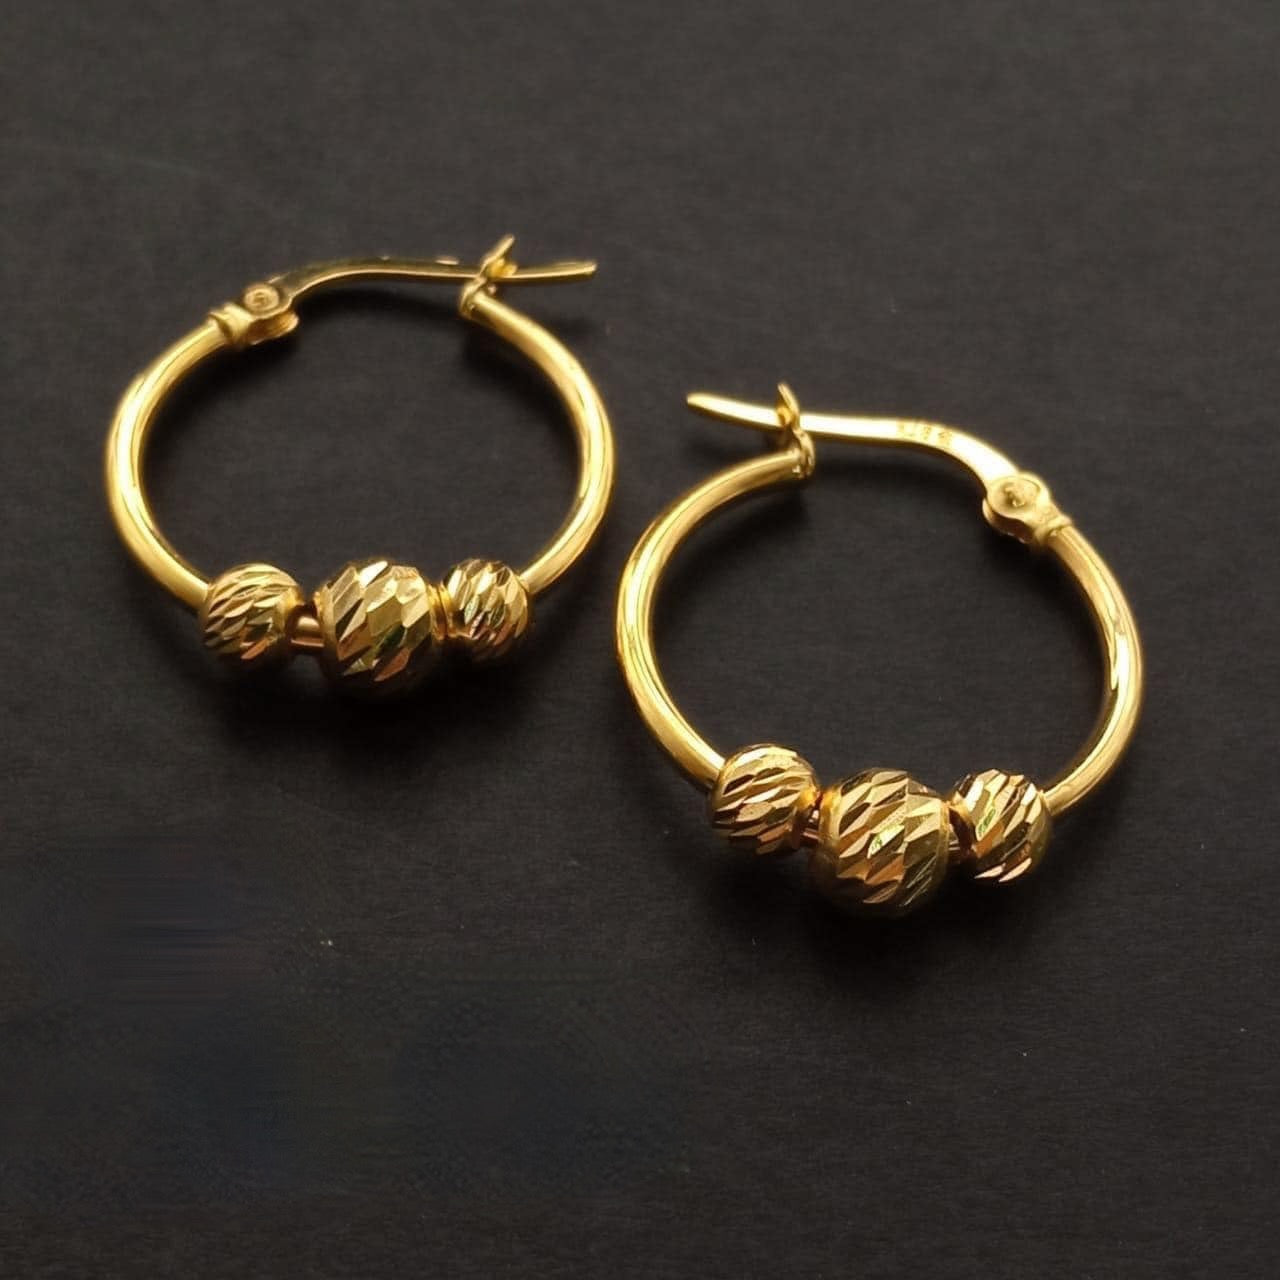 Hoop Earrings with Tricolor Balls 18K Gold